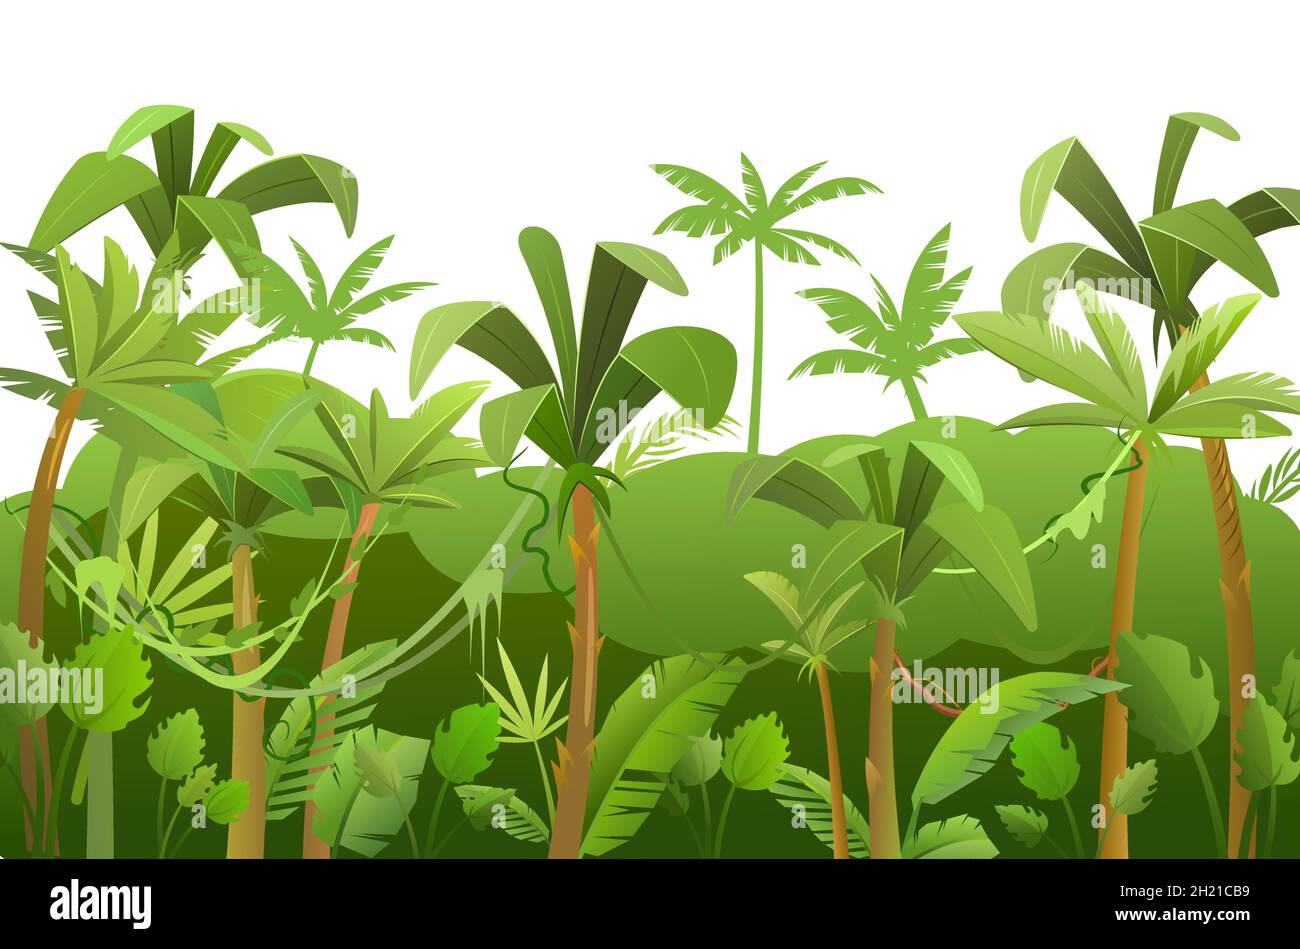 Jungle background. Plants rainforest. Beautiful green landscape with exotic trees and palms. Grass and lianas. Cute cartoon style. Isolated on white Stock Vector